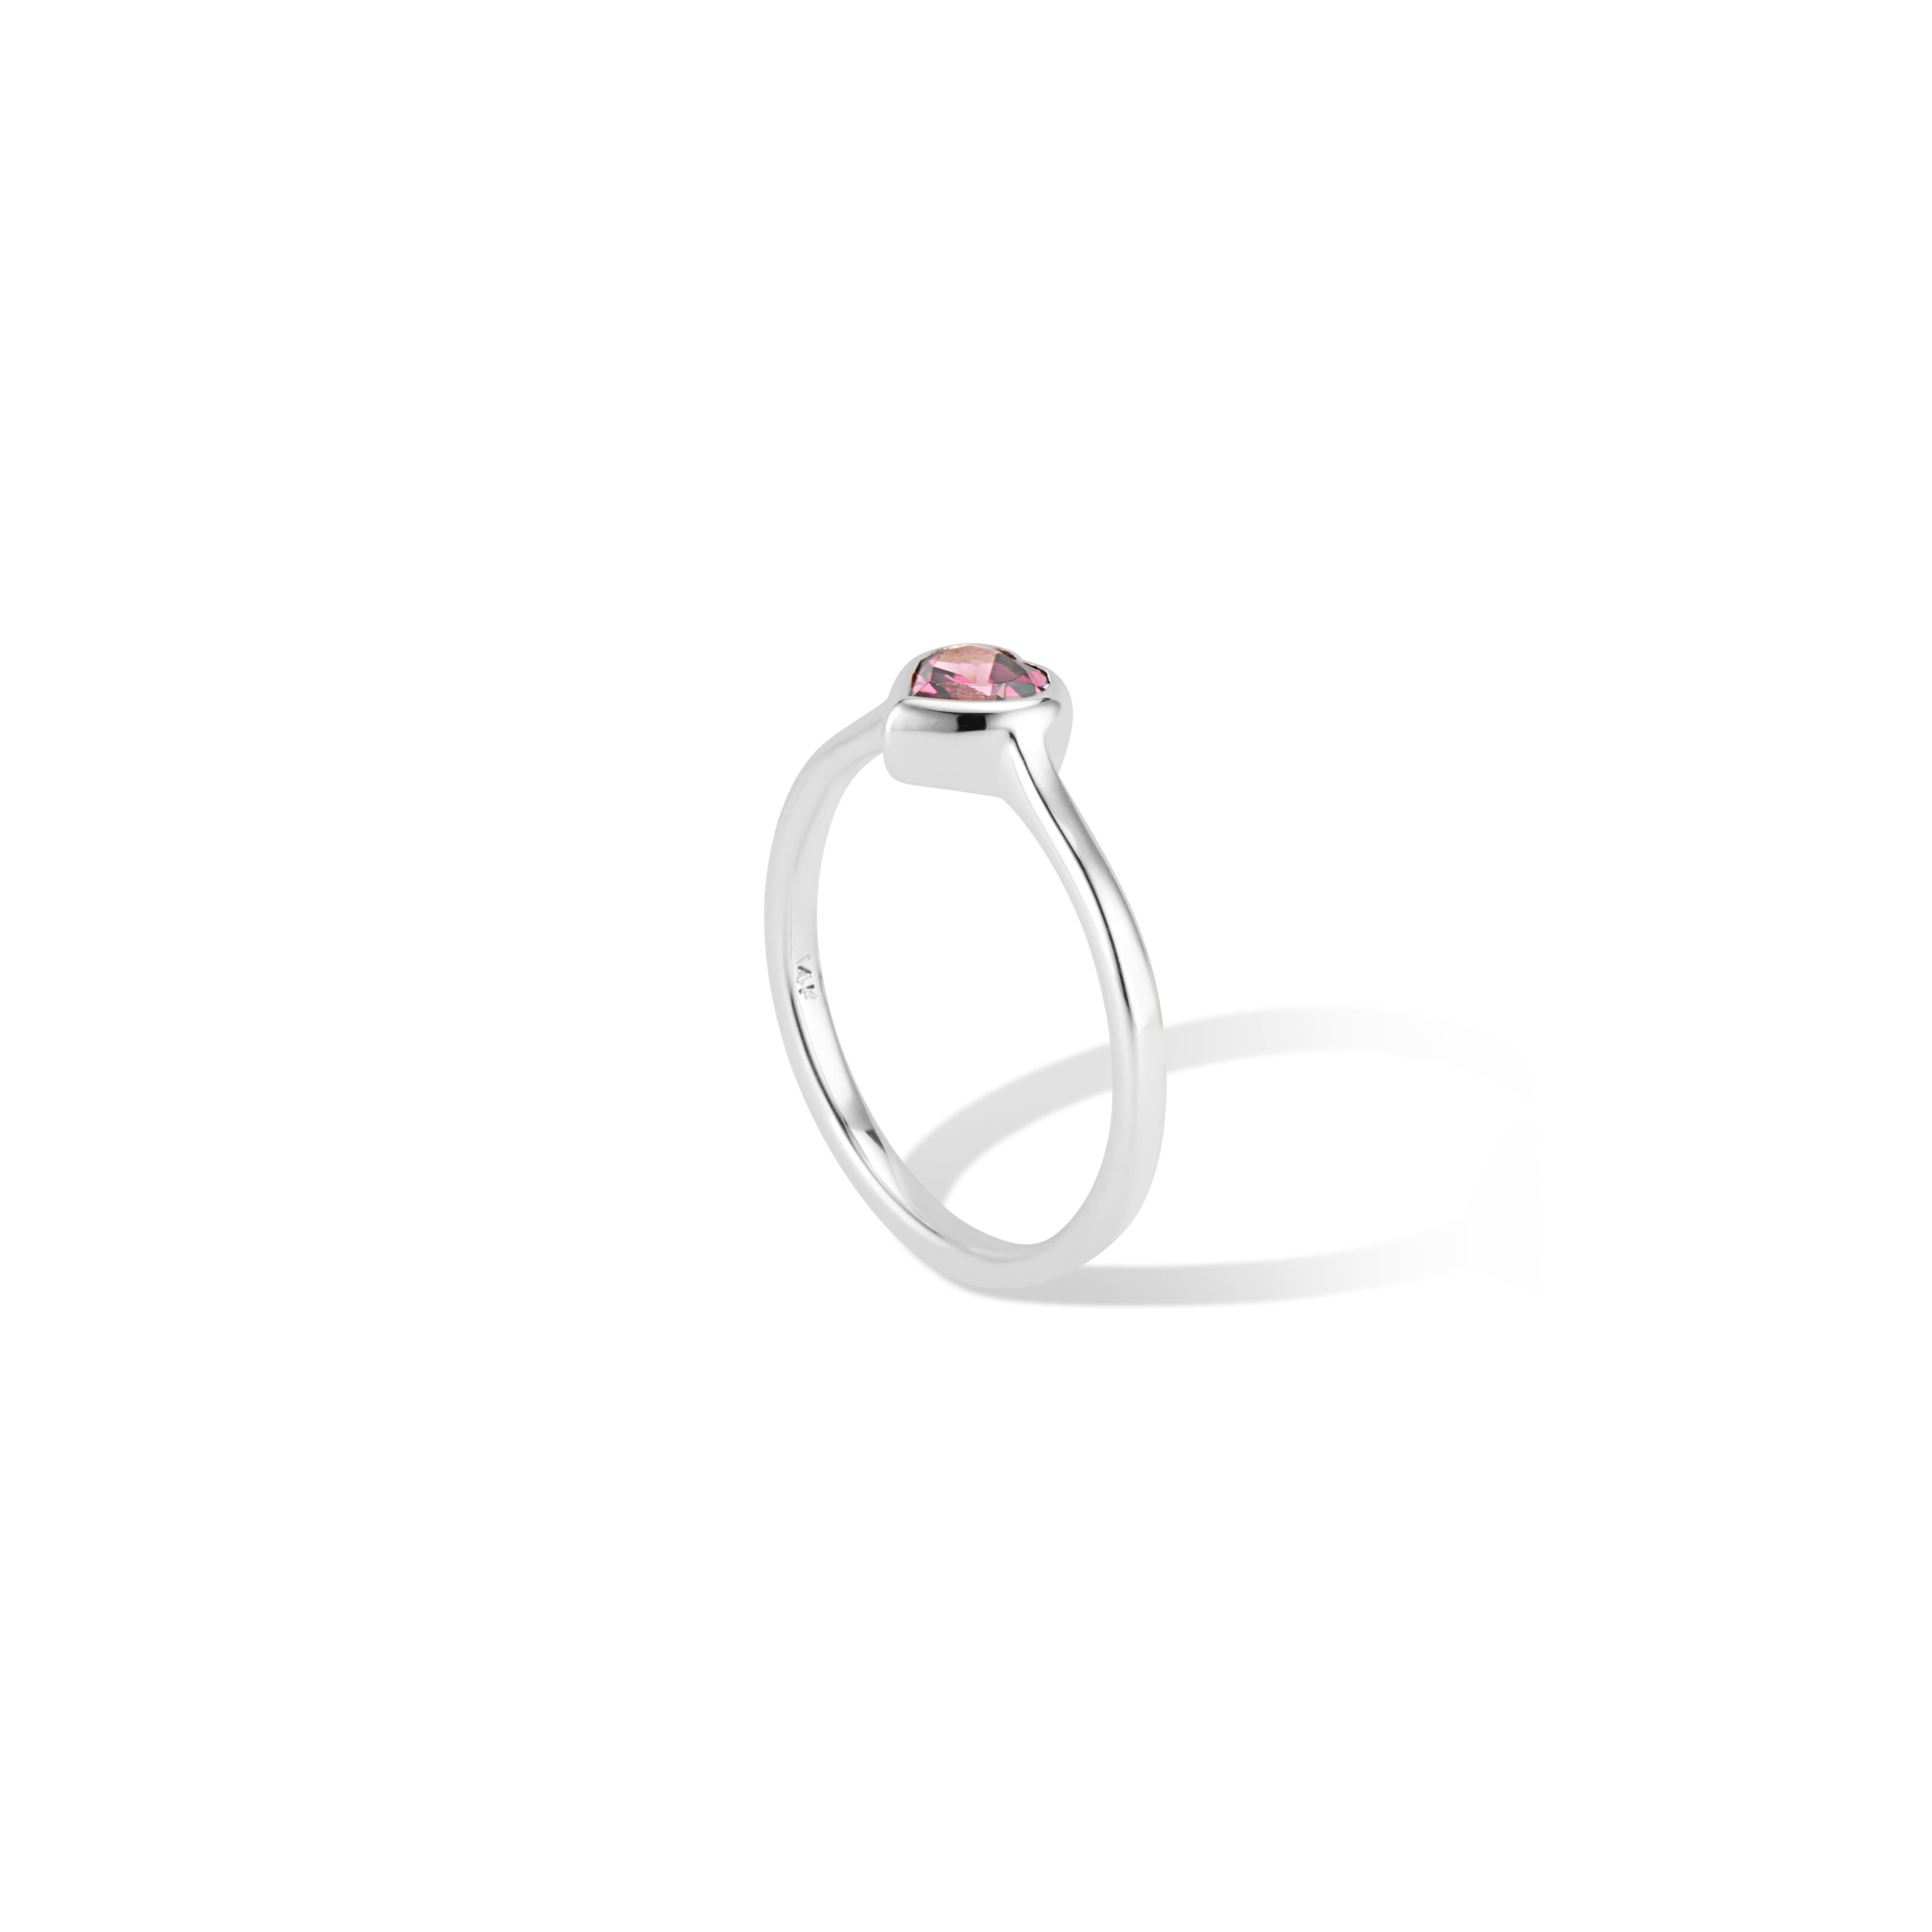 This petite Gold Heart Ring is perfect for stacking.
Featuring a striking ½ carat (.50tcw) Rhodolite Garnet Heart in a high polished 14k white gold bezel setting.
Available in 14k yellow, rose or  white gold.
Ring Size: US Size 6 - complimentary